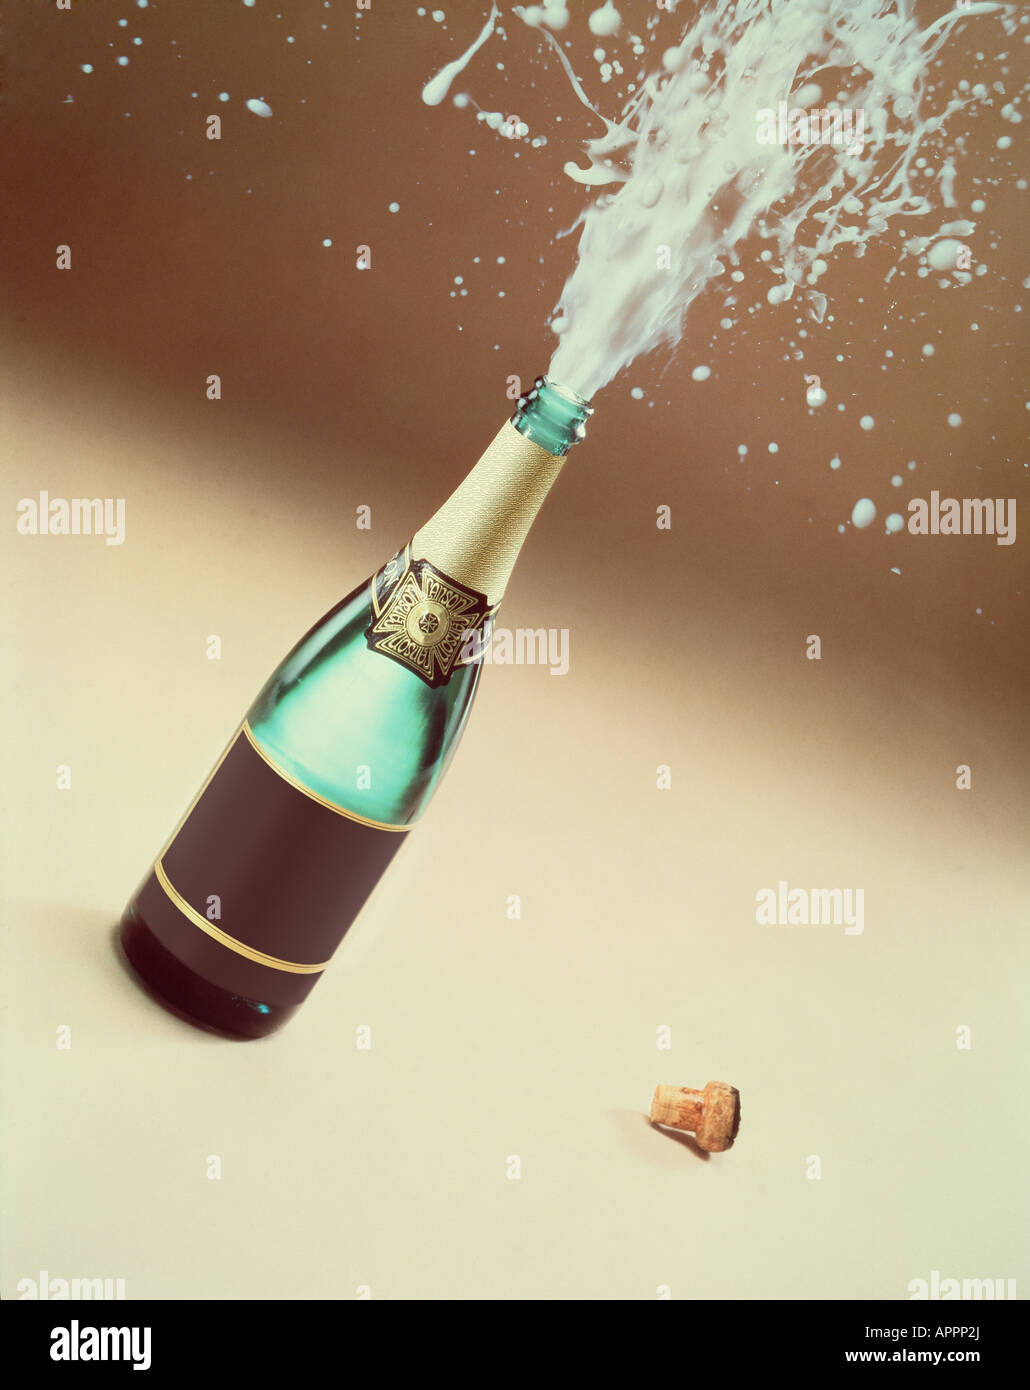 Exploding spray from champagne bottle Stock Photo - Alamy